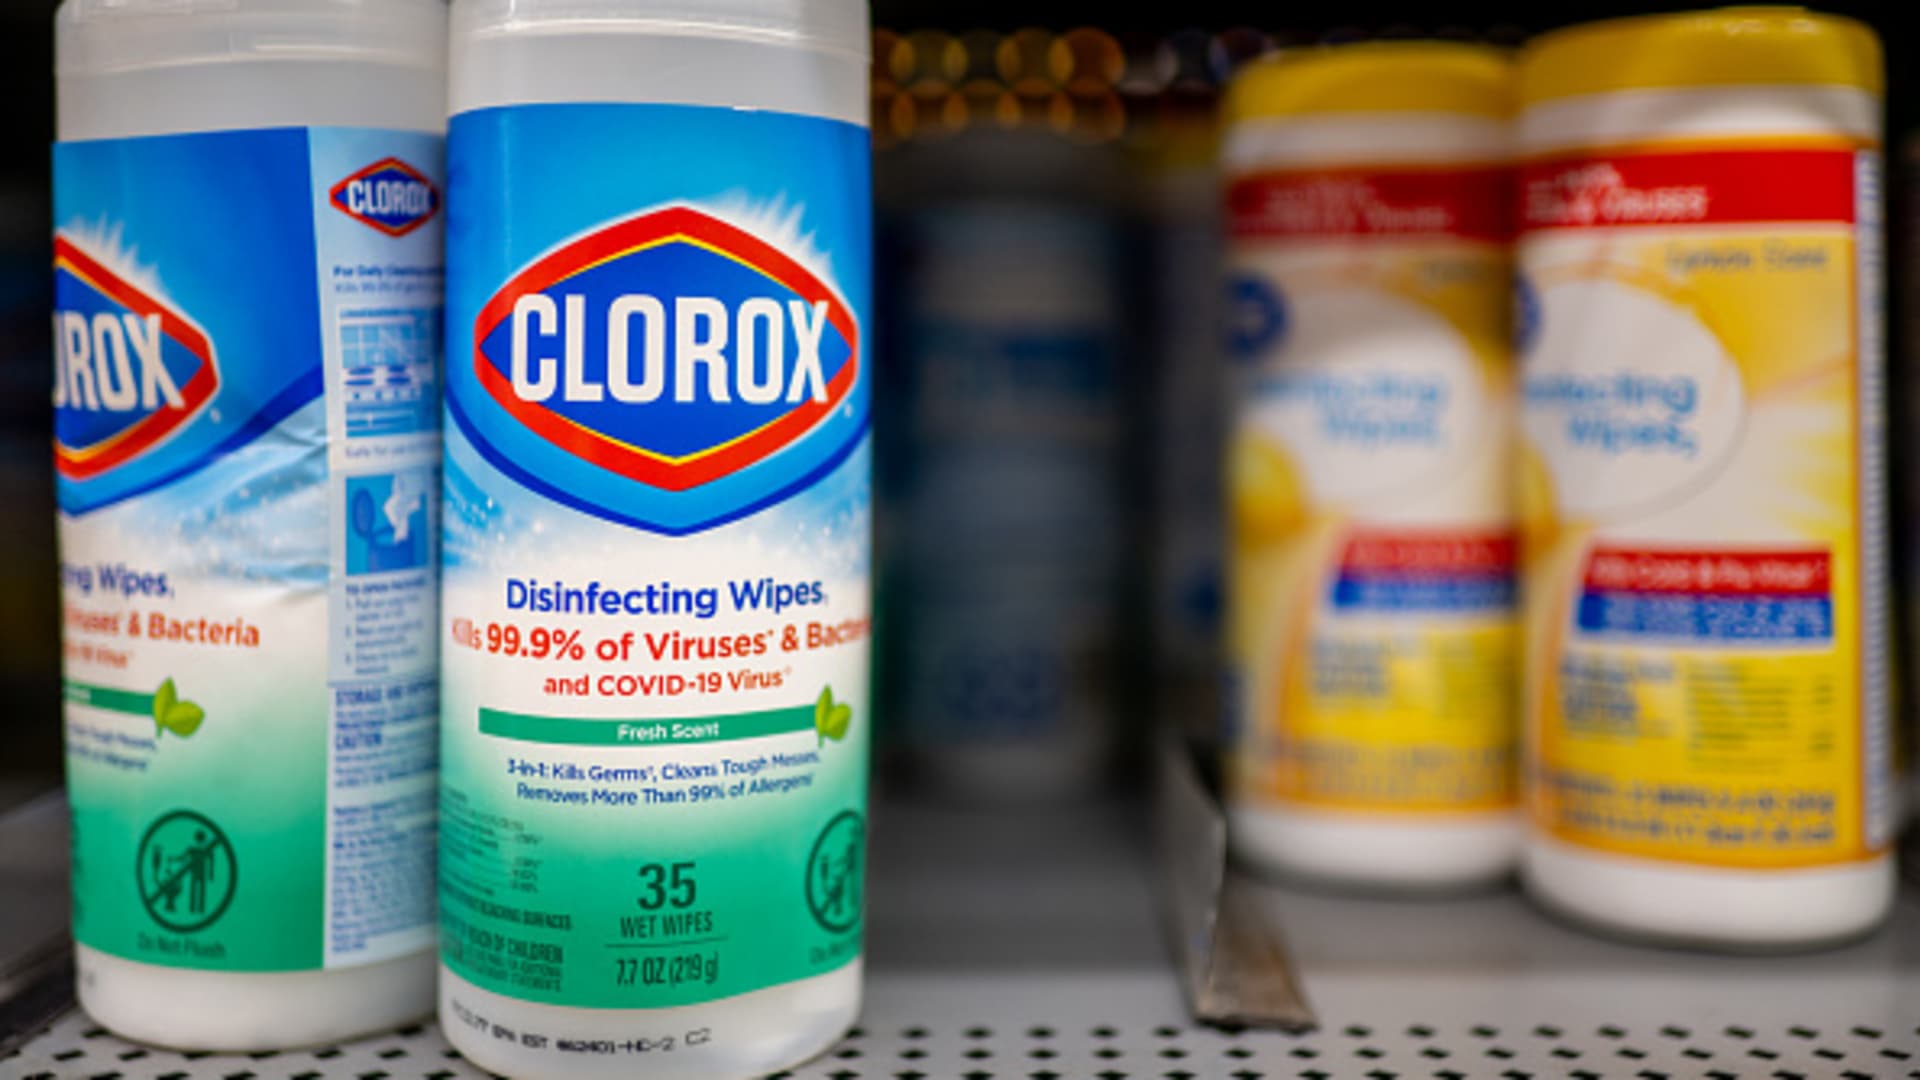 Stocks making the biggest moves after hours: SolarEdge, Qualcomm, Etsy, Clorox and more